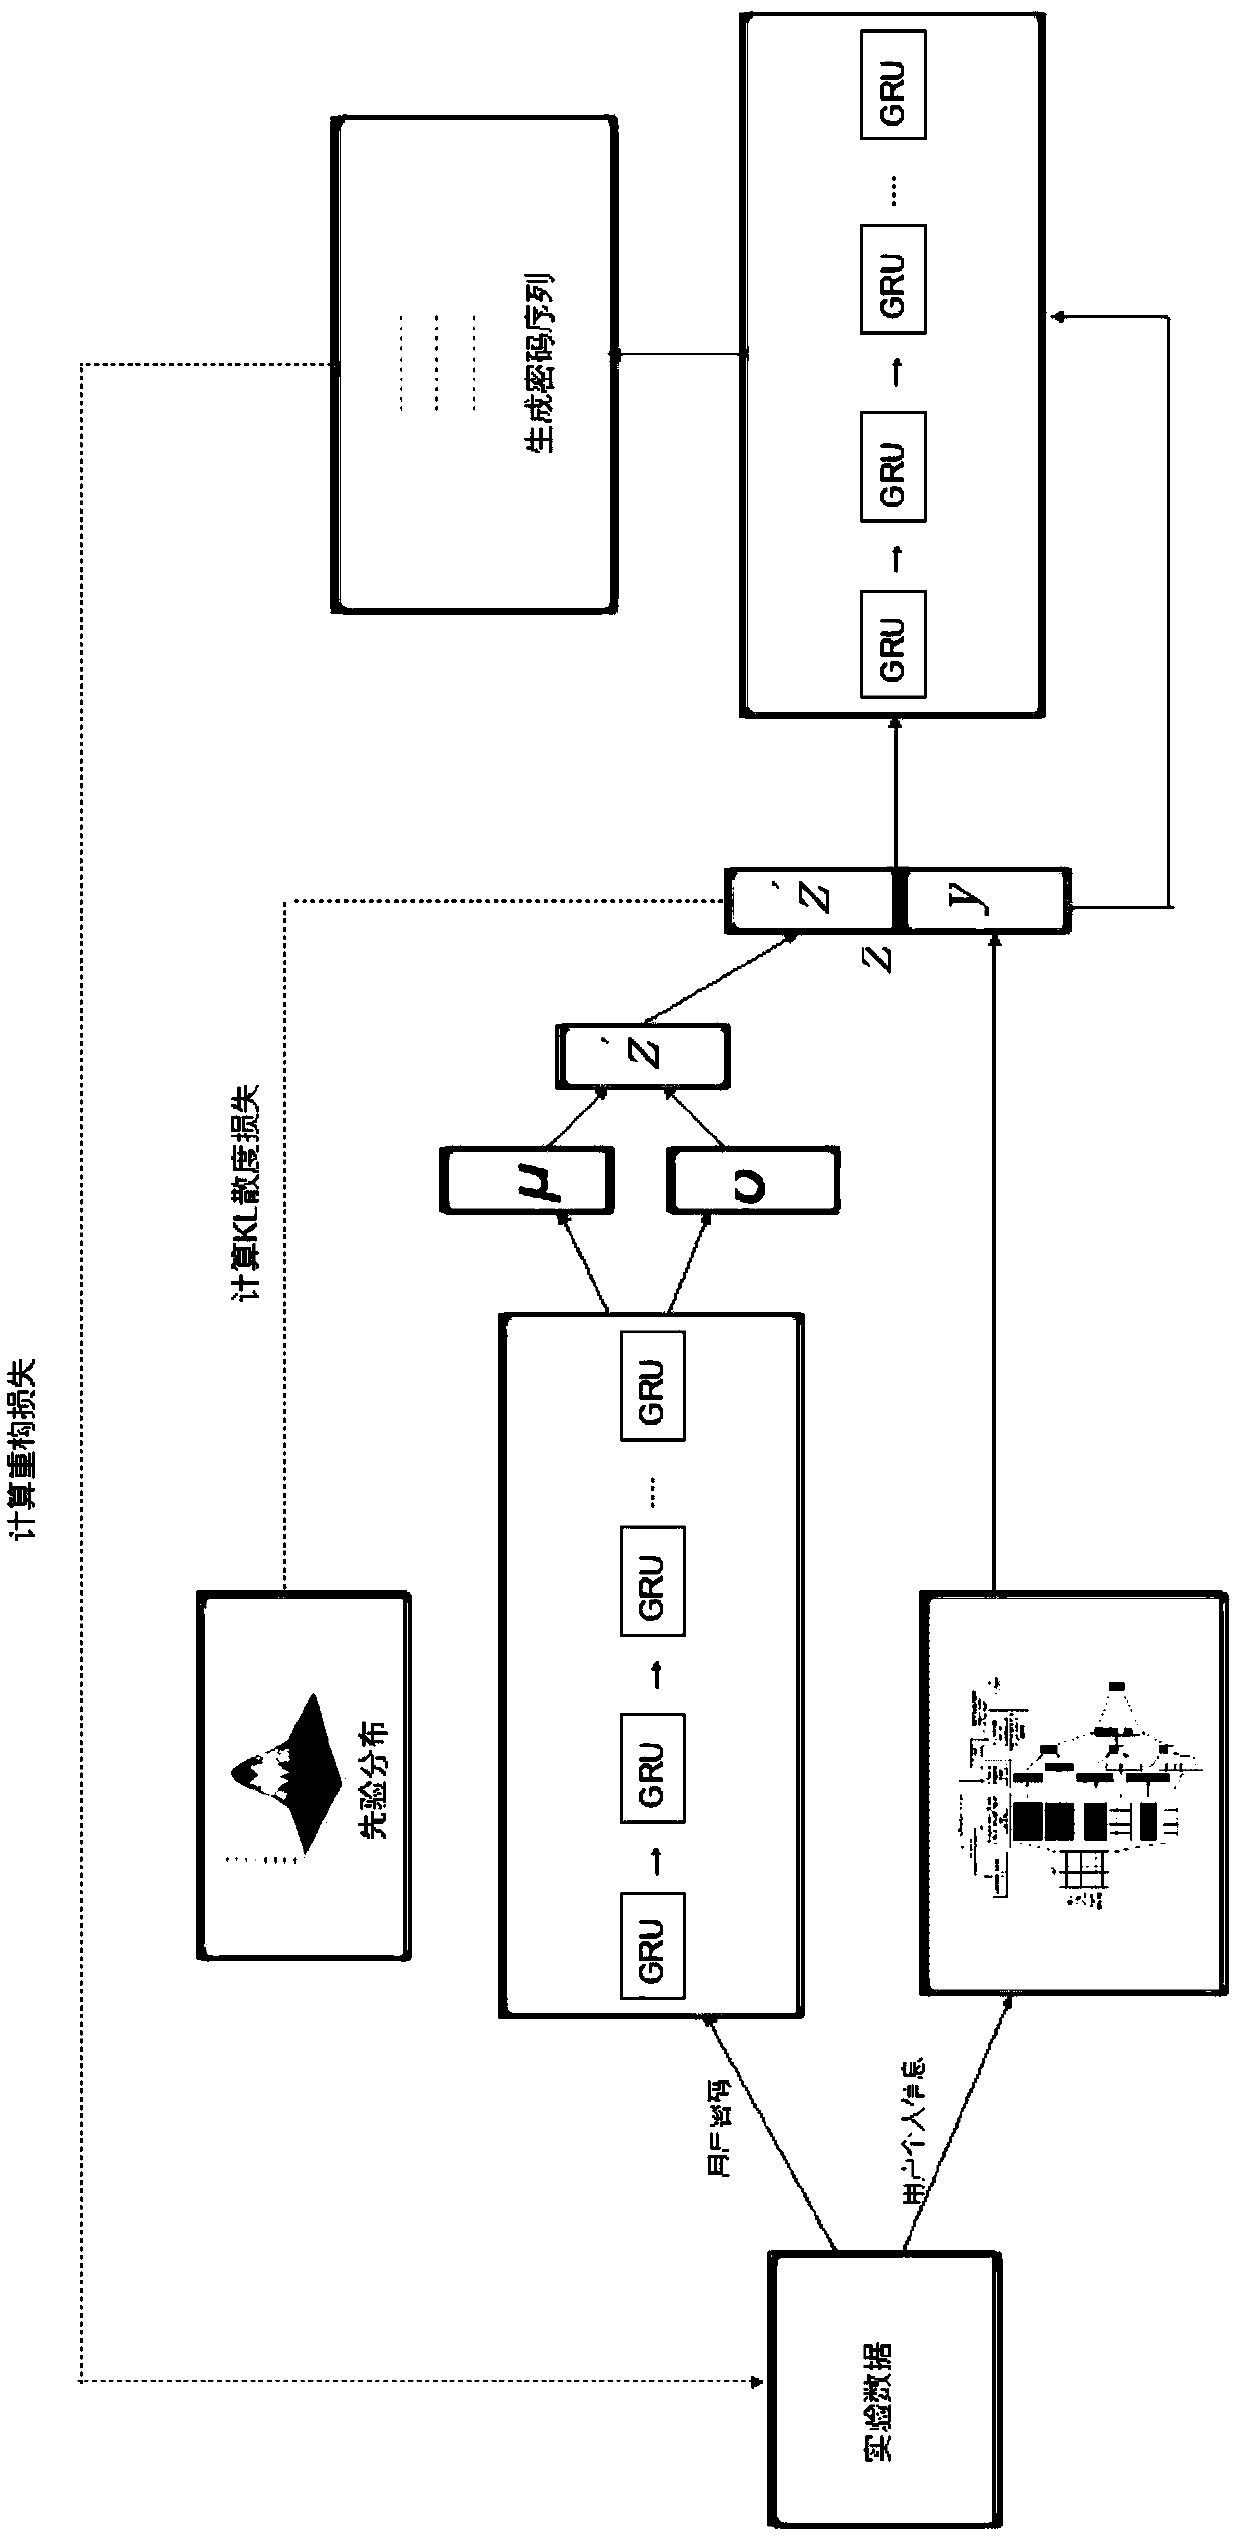 A password attack evaluation method based on conditional variational self-coding